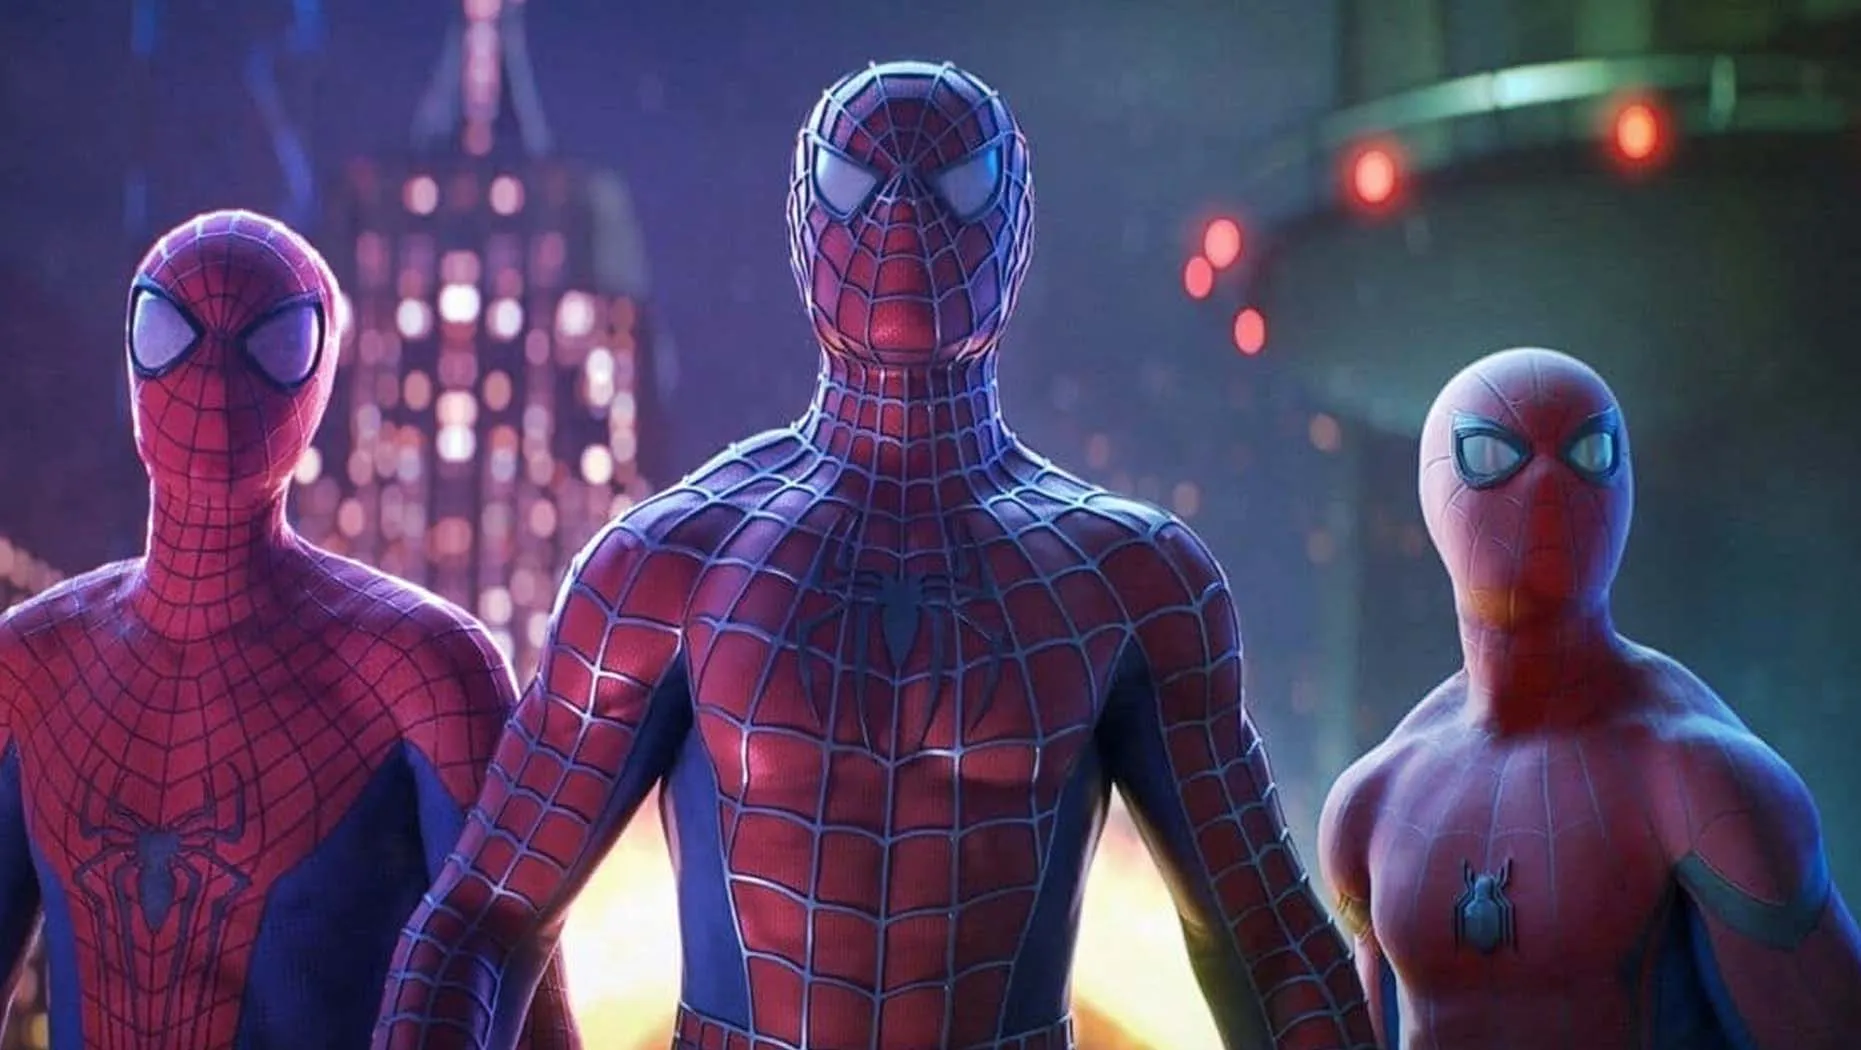 ‘Spider-Man: No Way Home’ swings 7 MTV Movie & TV Awards noms: here’s how to vote